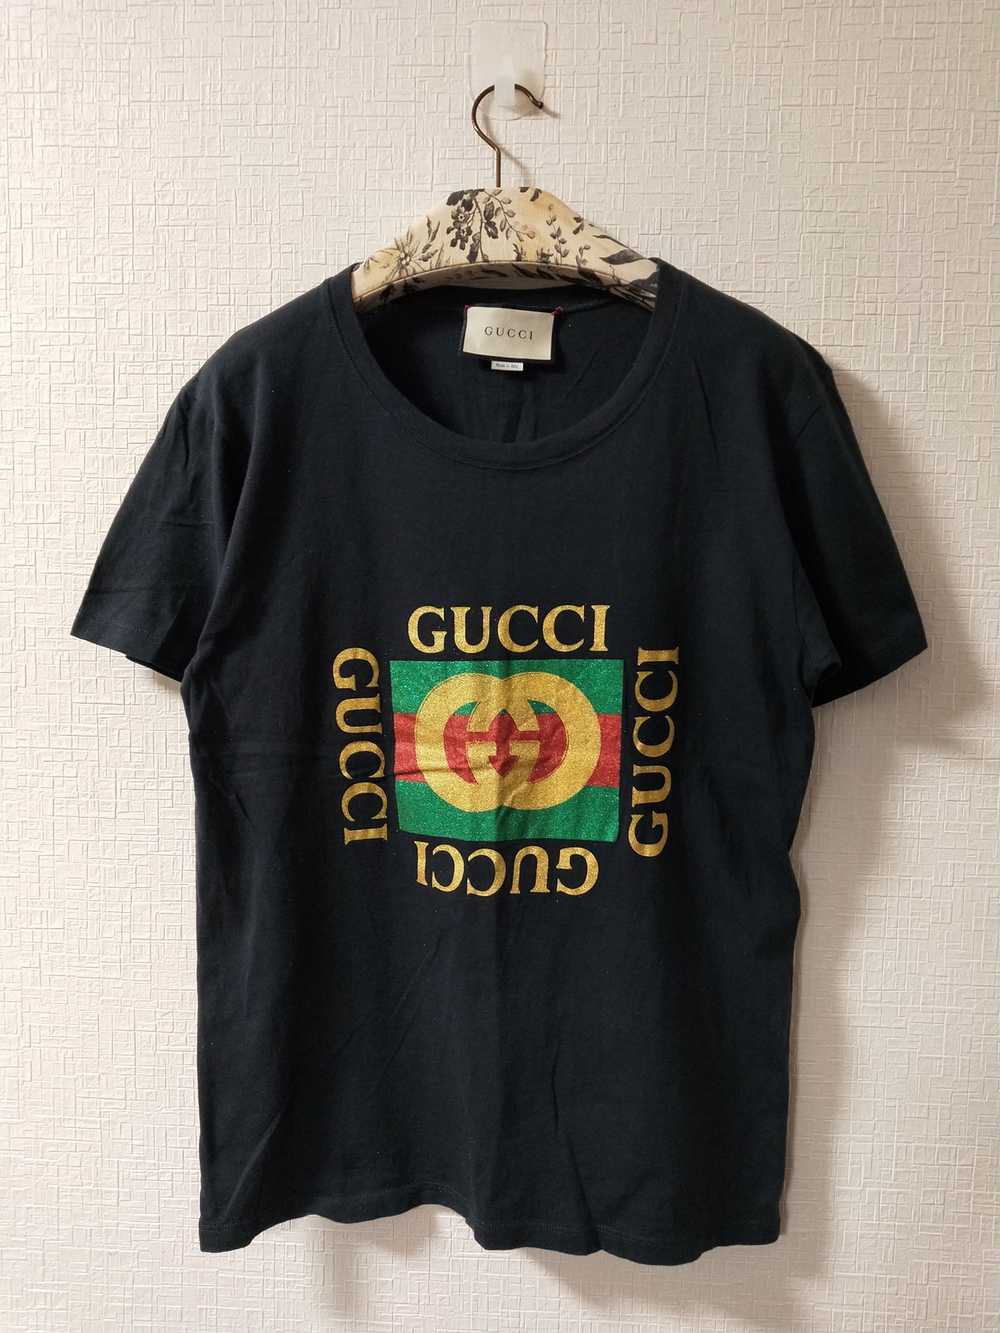 NEW Gucci Oversized Short Sleeve Cotton T-Shirt with Sequined Tiger Logo S  $1100